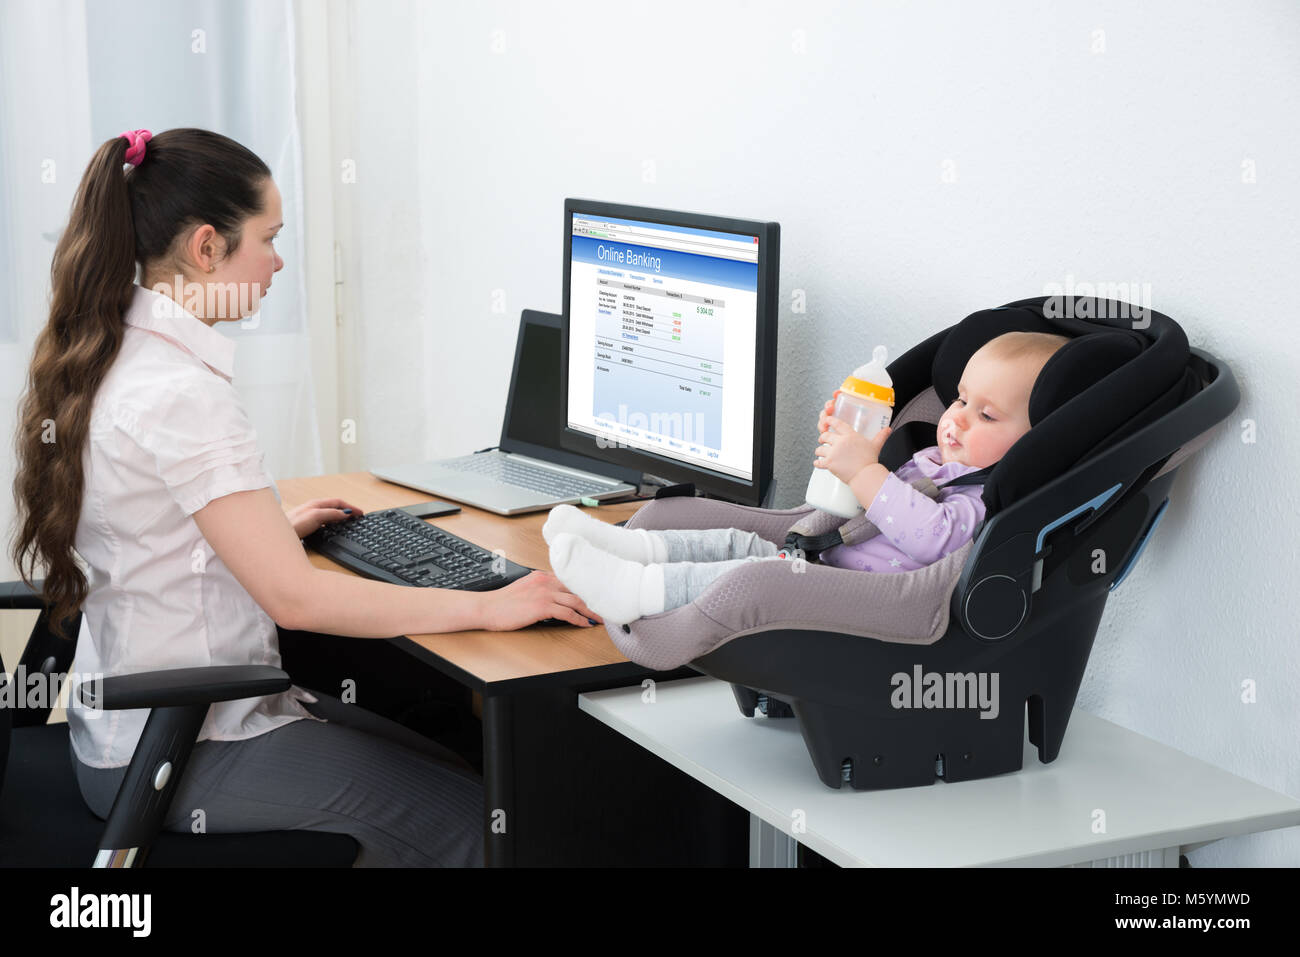 Woman Doing Online Banking On Computer With Baby Holding Milk Bottle Stock Photo